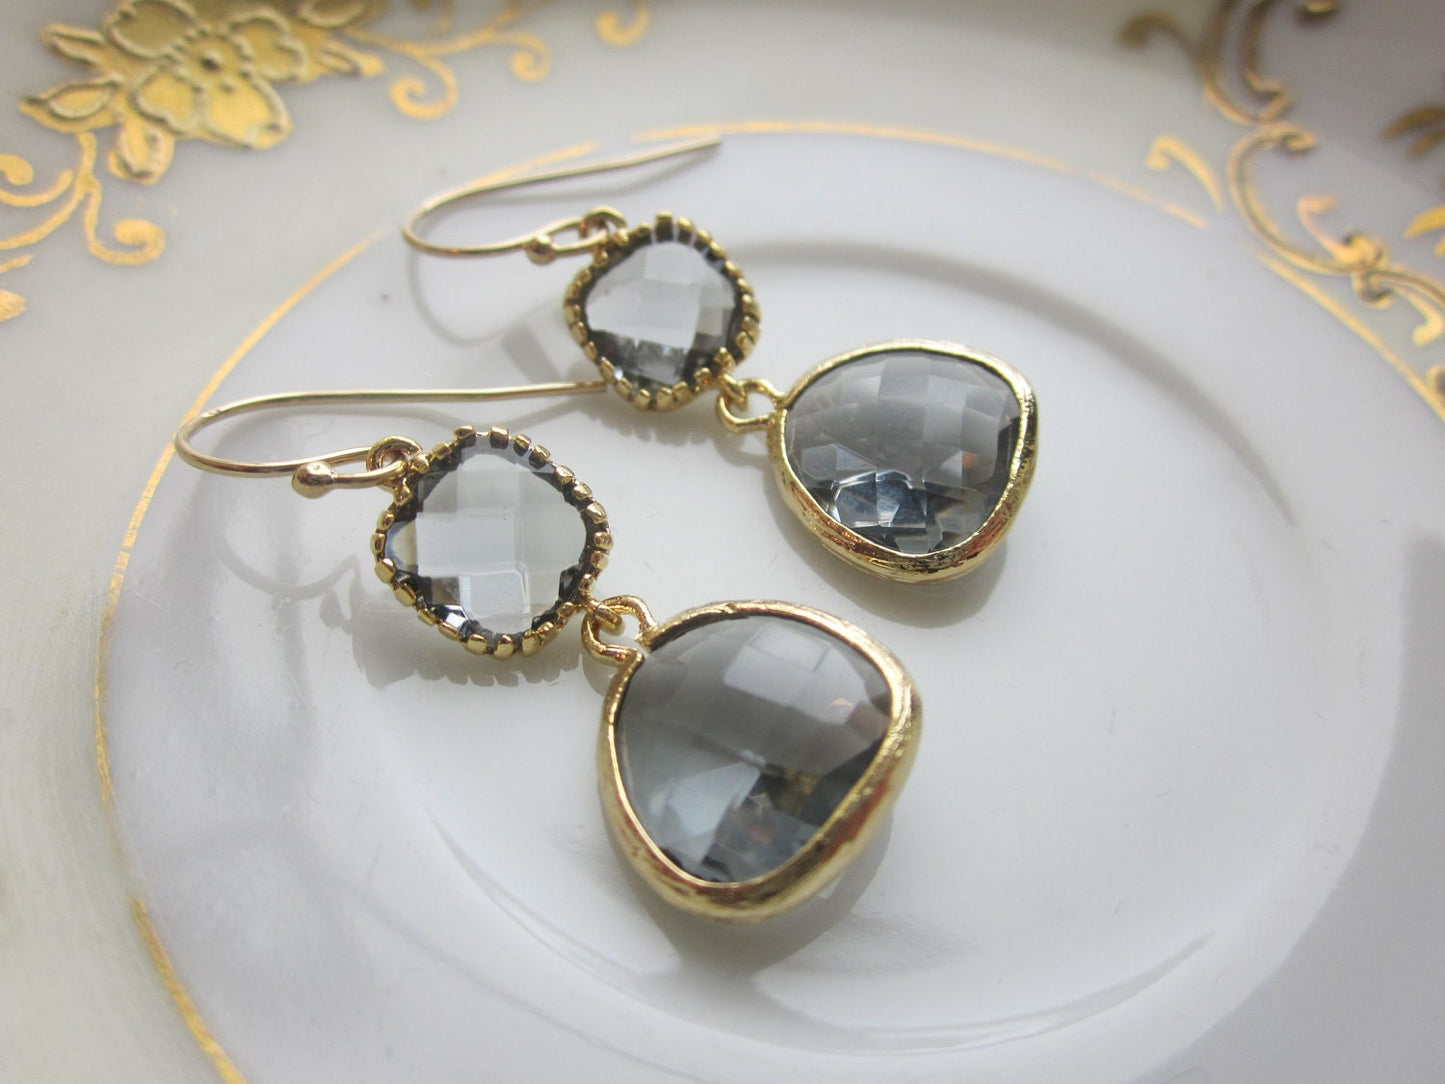 Charcoal Gray Earrings Gold Plated Two Tier - Bridesmaid Earrings - Wedding Earrings - Valentines Day Gift